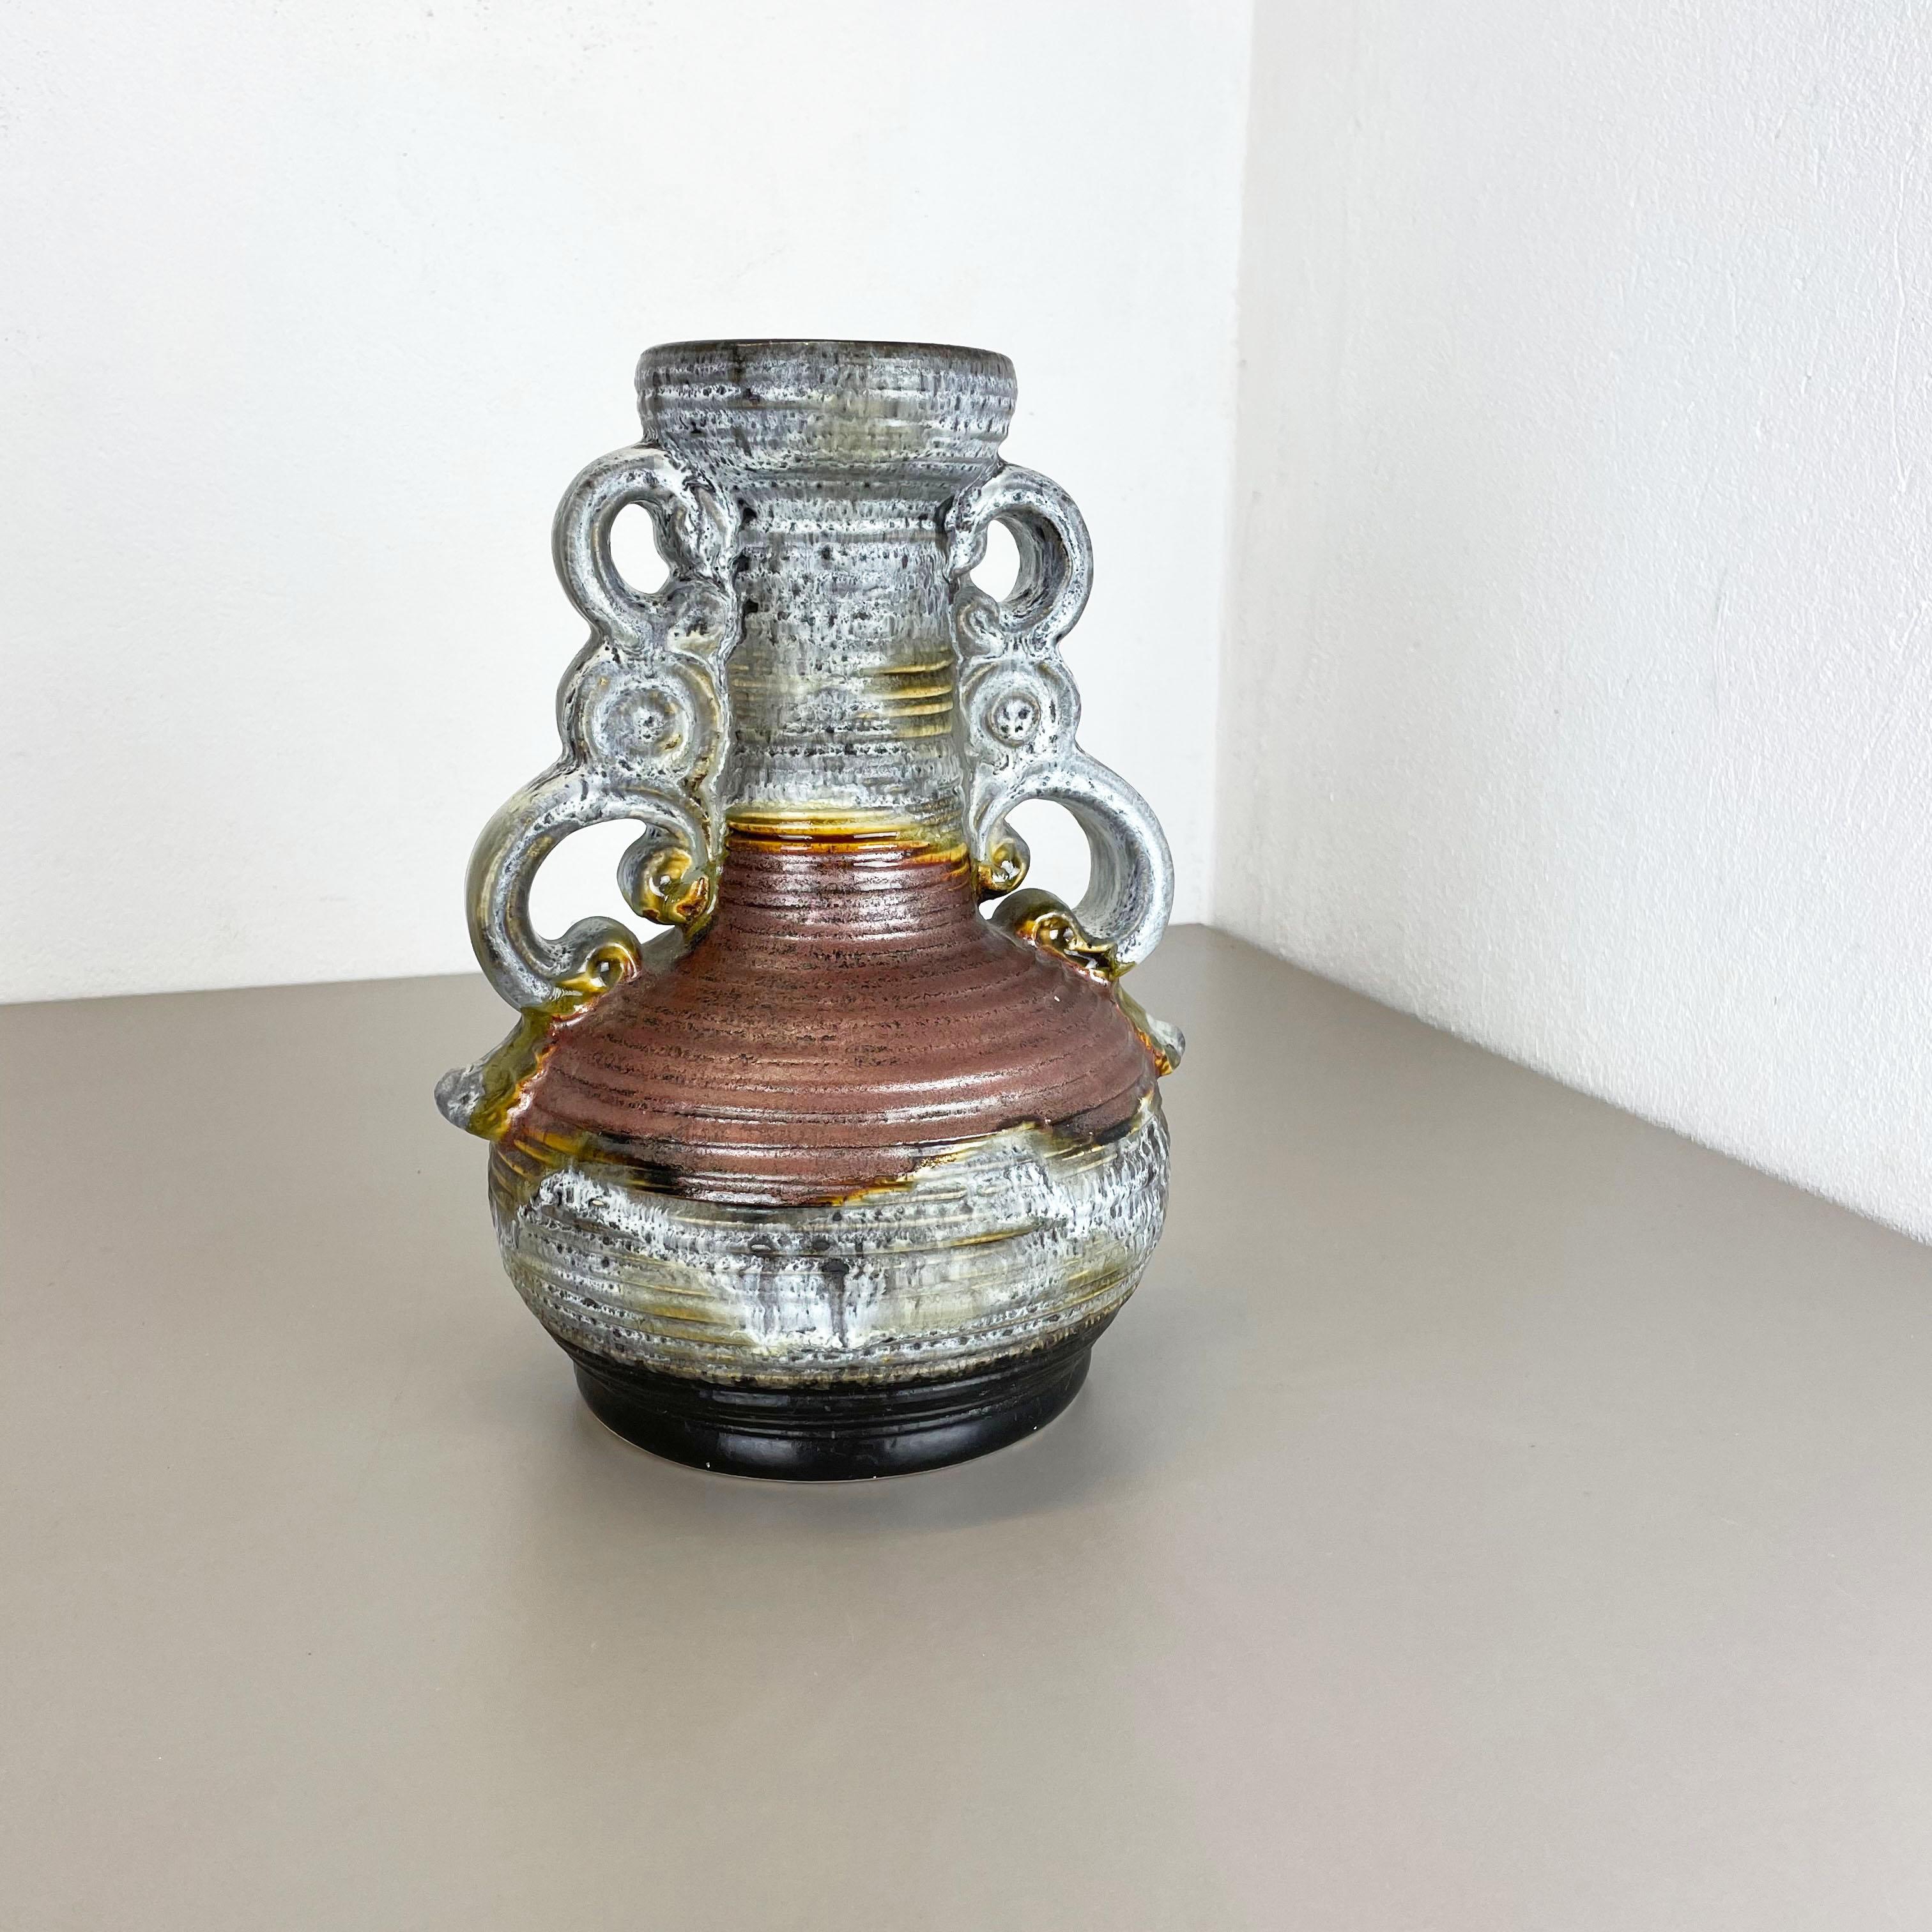 Article:

Pottery ceramic vase 


Producer:

Dümmler and Breiden, Germany


Decade:

1970s



Description:

Original vintage 1970s pottery ceramic vase made in Germany. High quality German production with a nice abstract